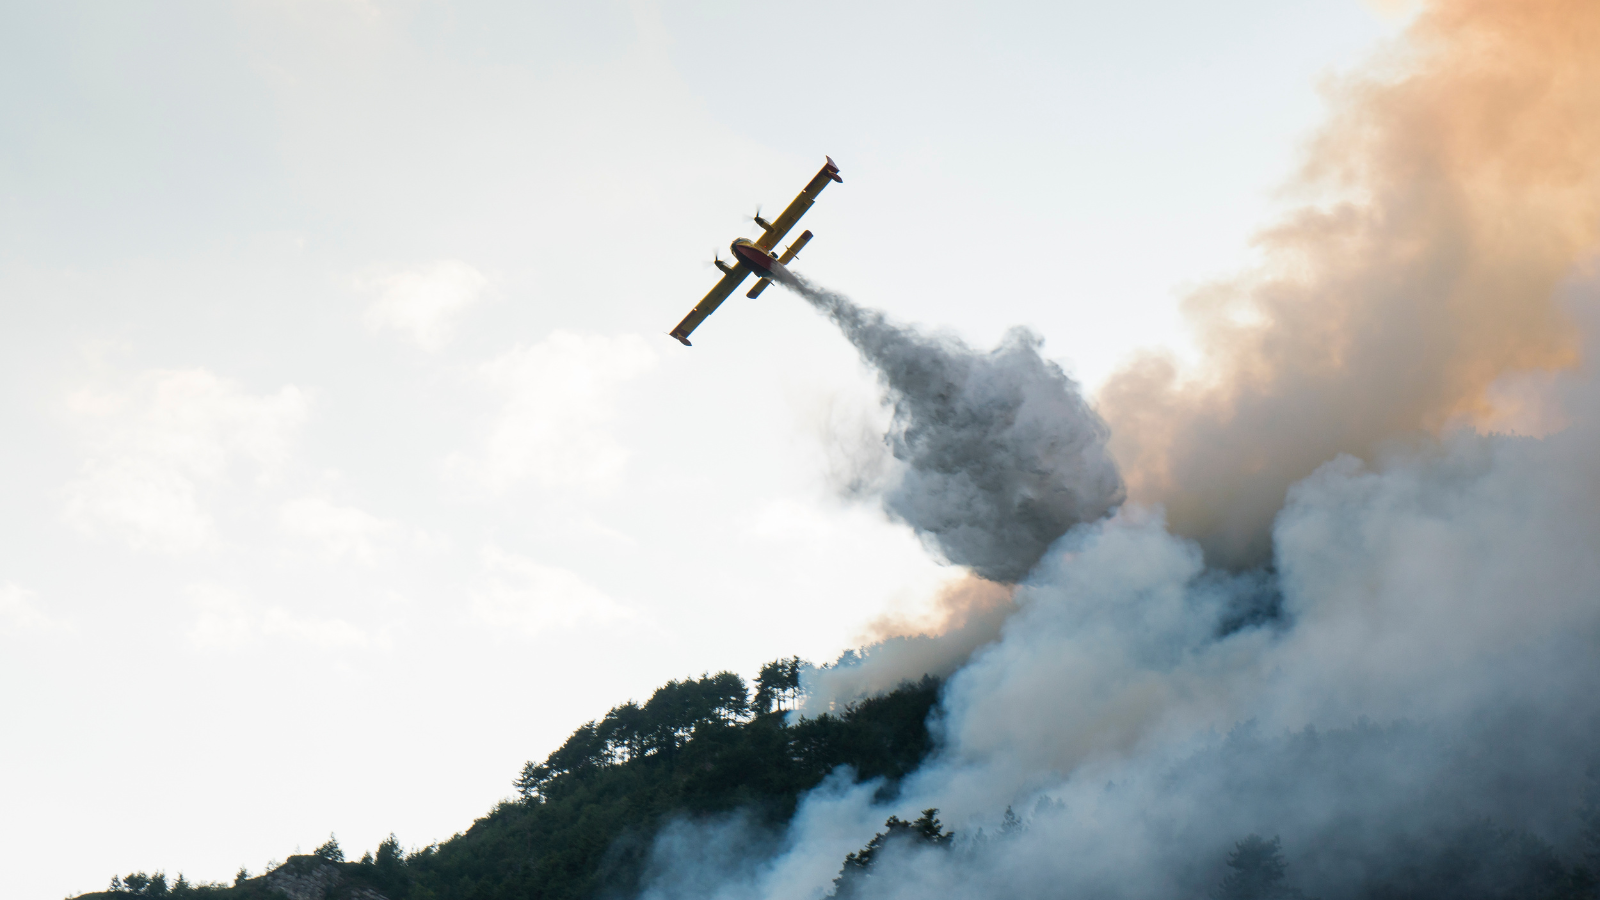 Firefighters in BC providing aerial coverage to combat spreading wildfires in BC's interior.